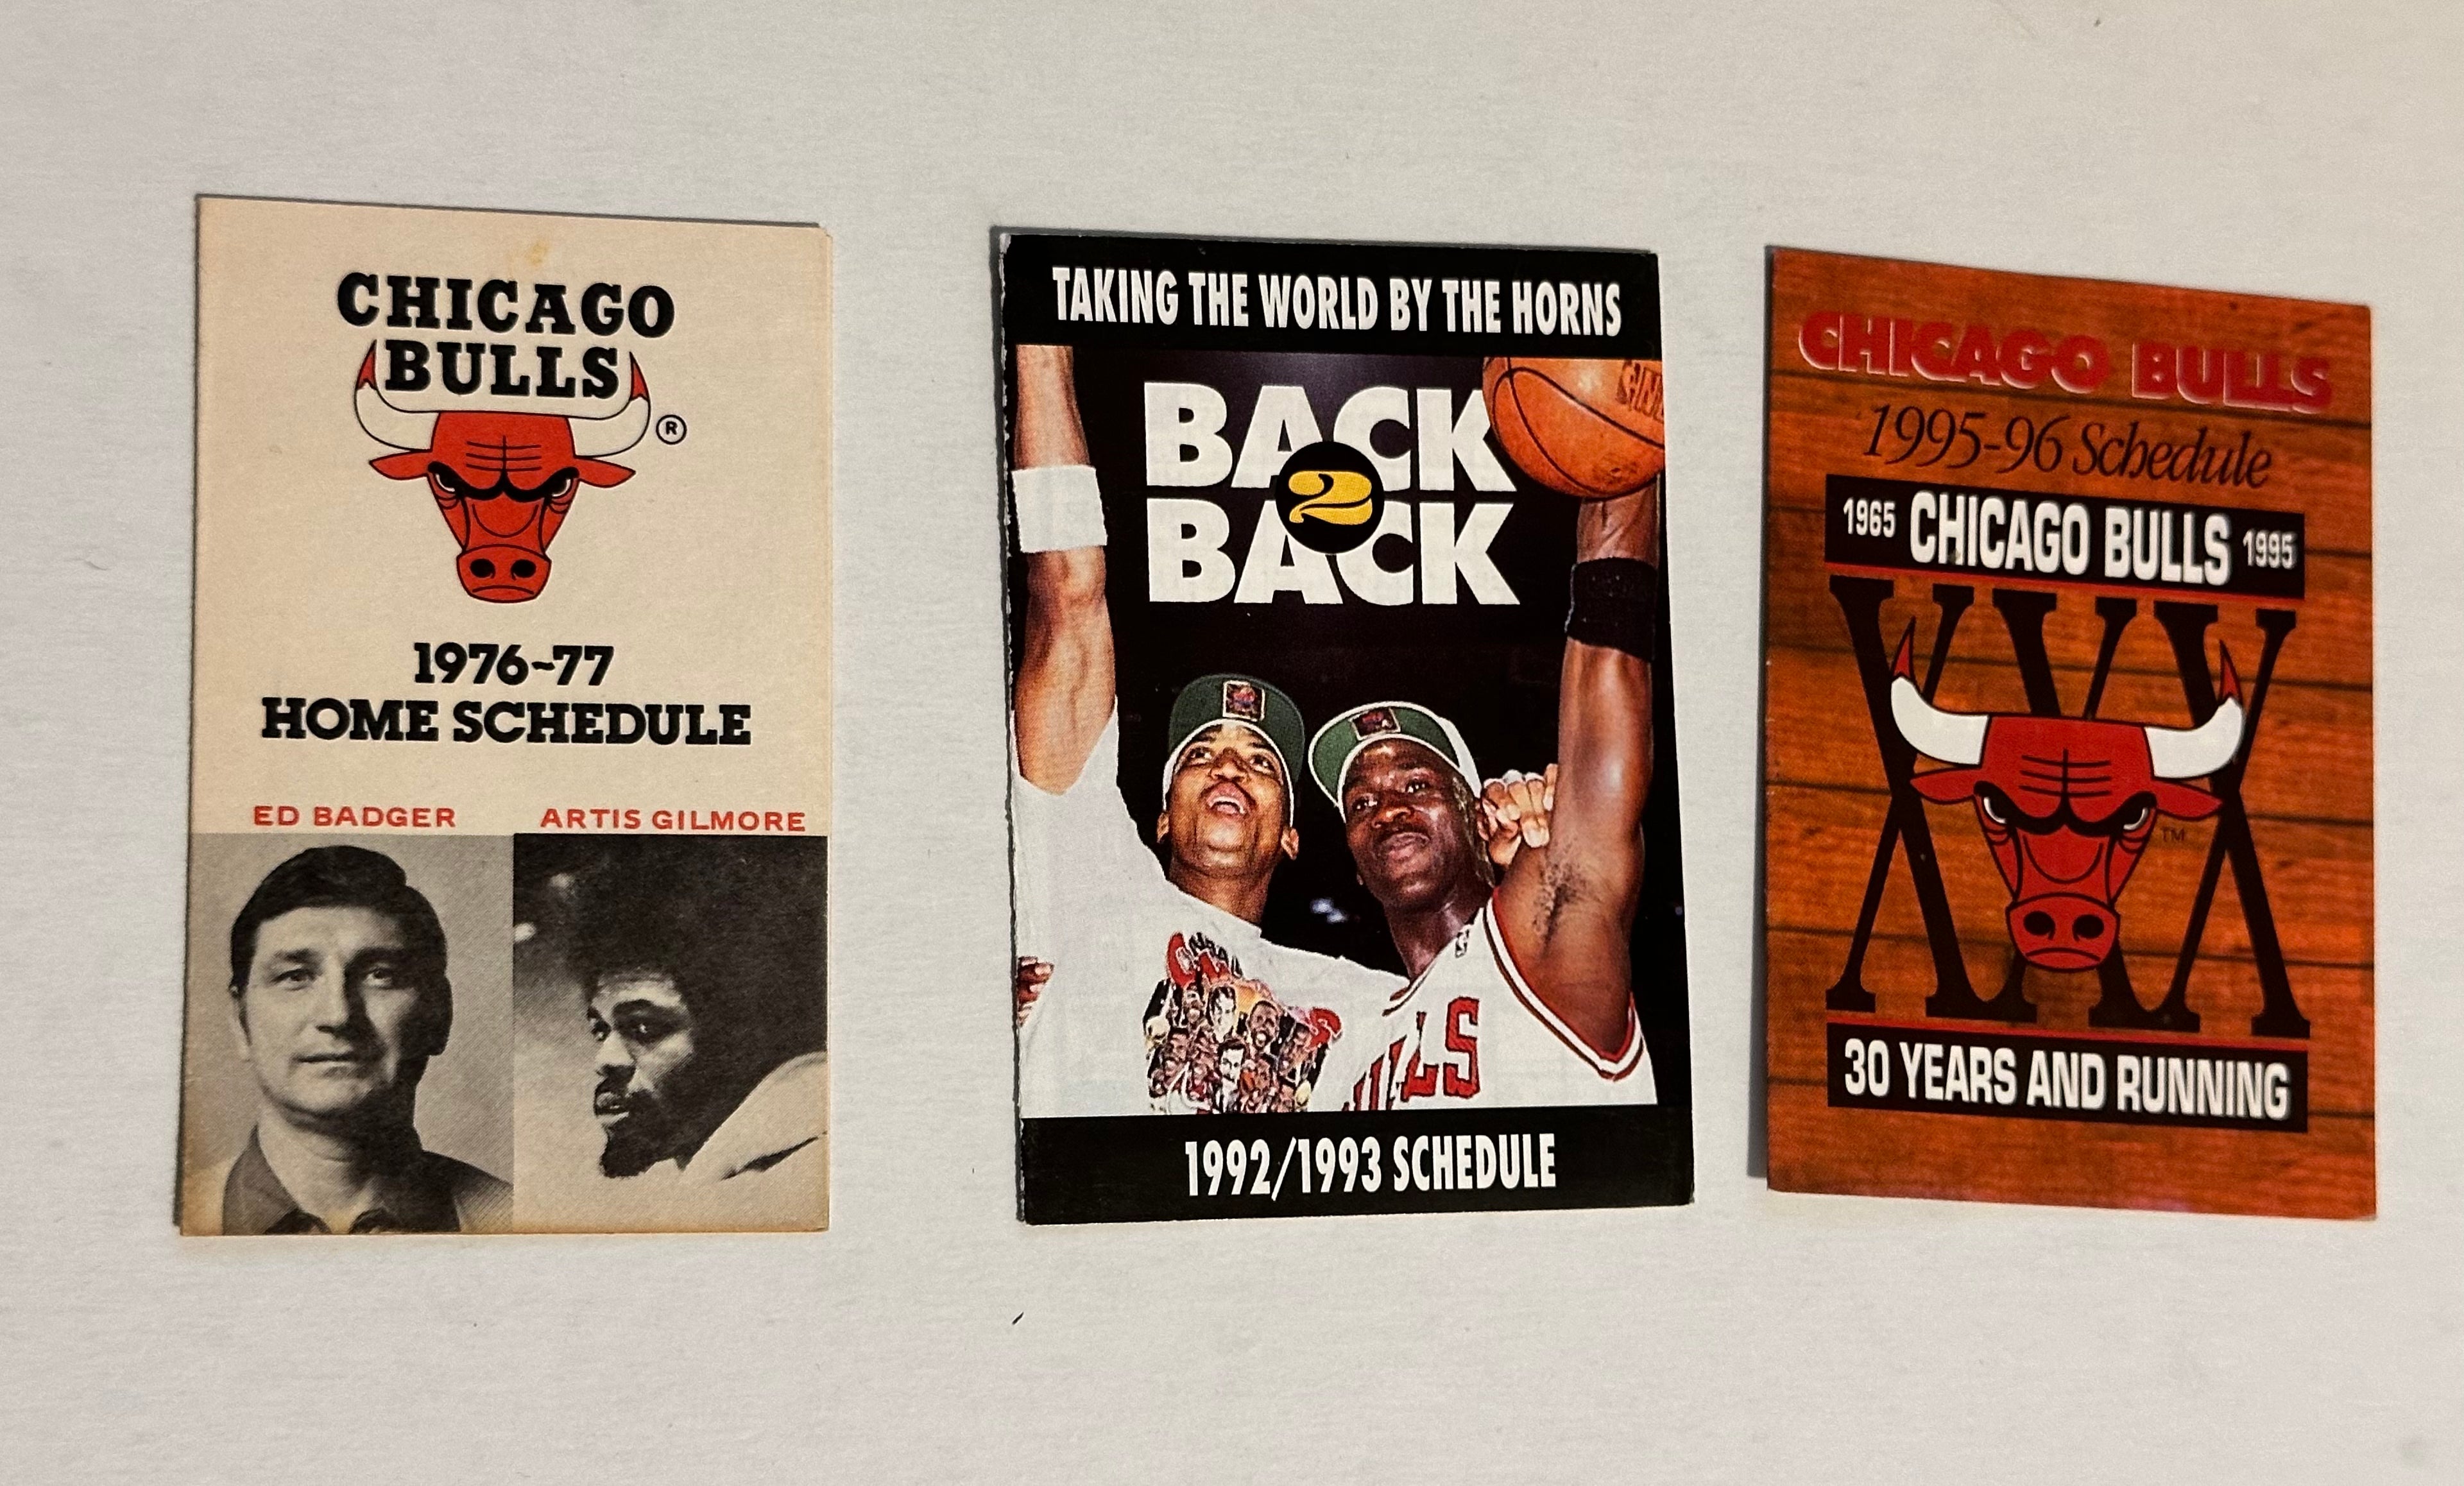 Chicago Bulls basketball three vintage schedules with Jordan back-to-back wins schedule